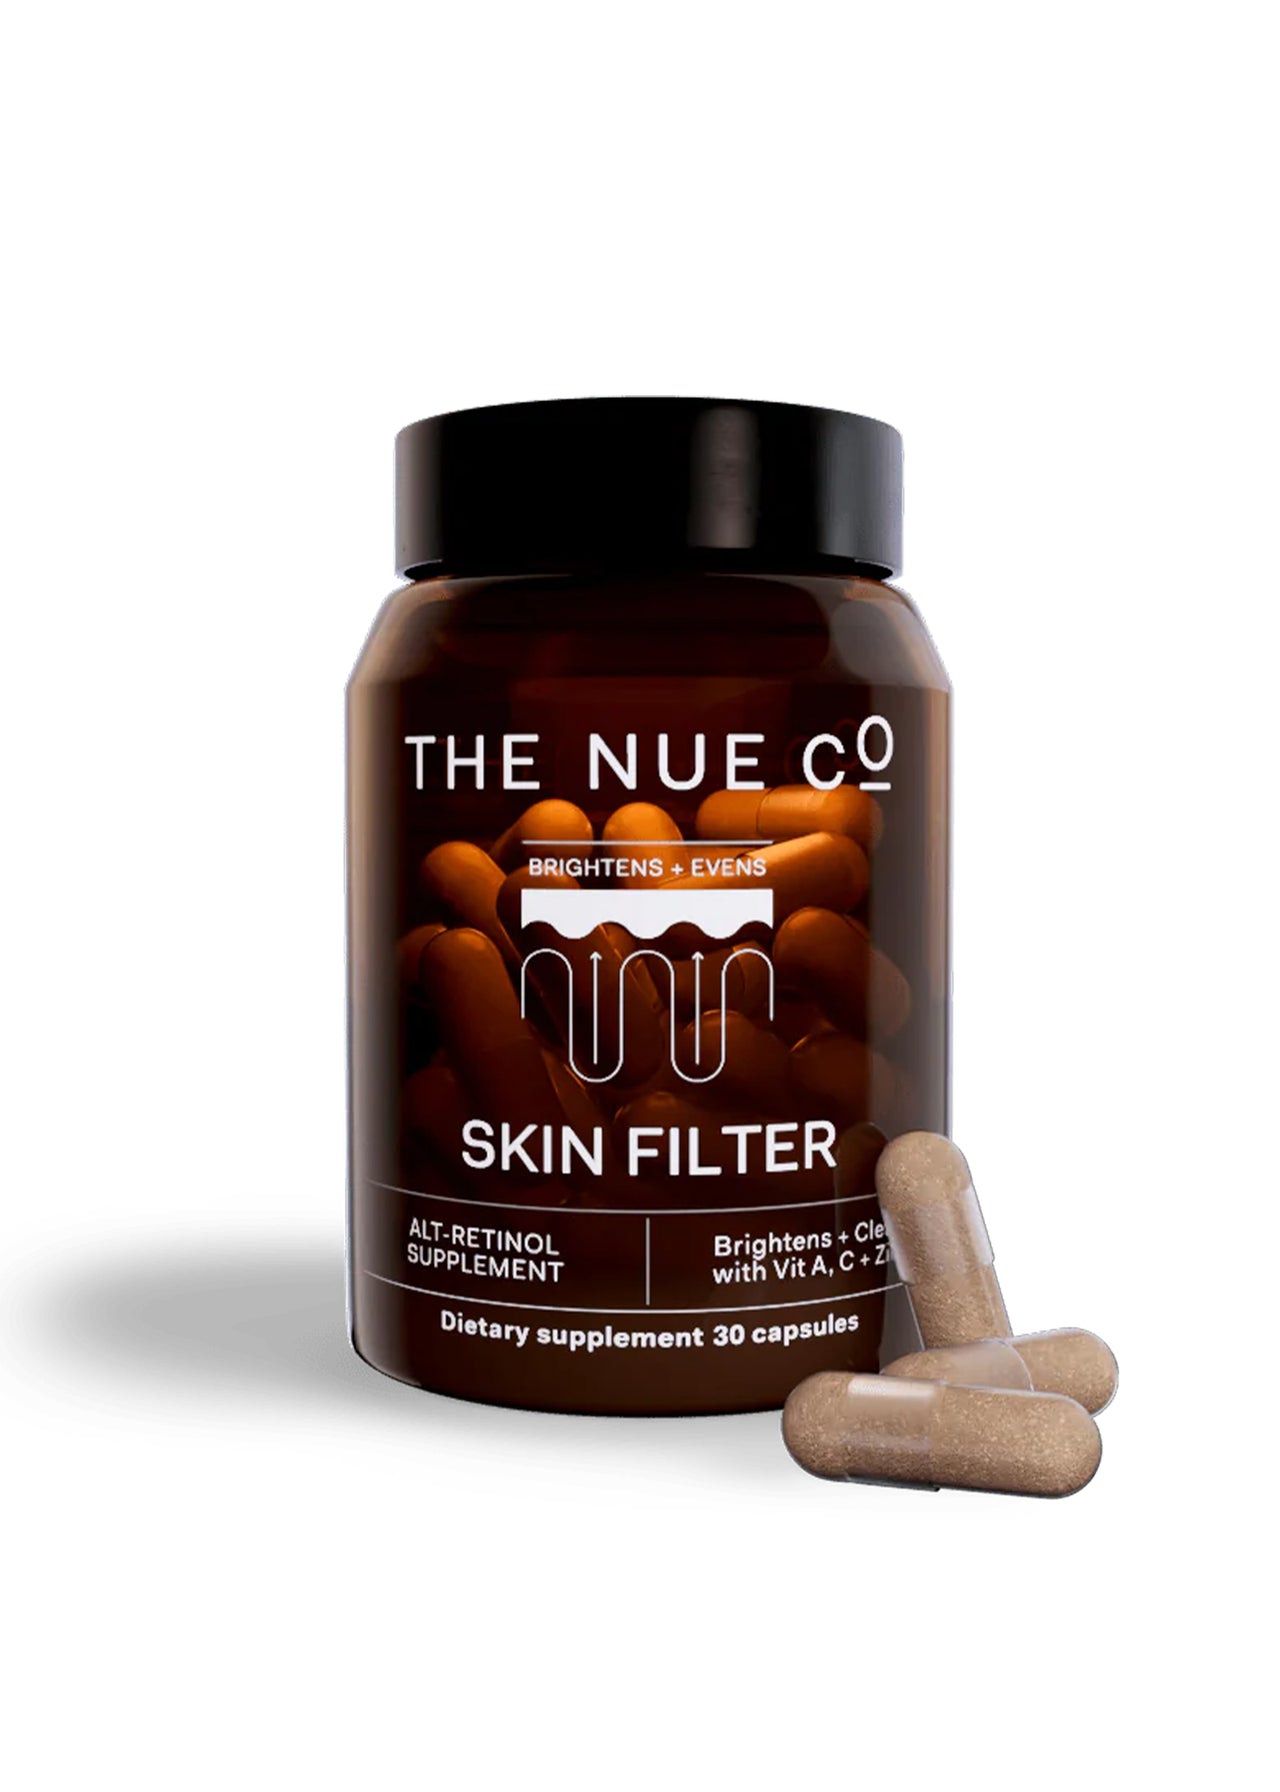 THE NUE CO Skin Filter Supplement